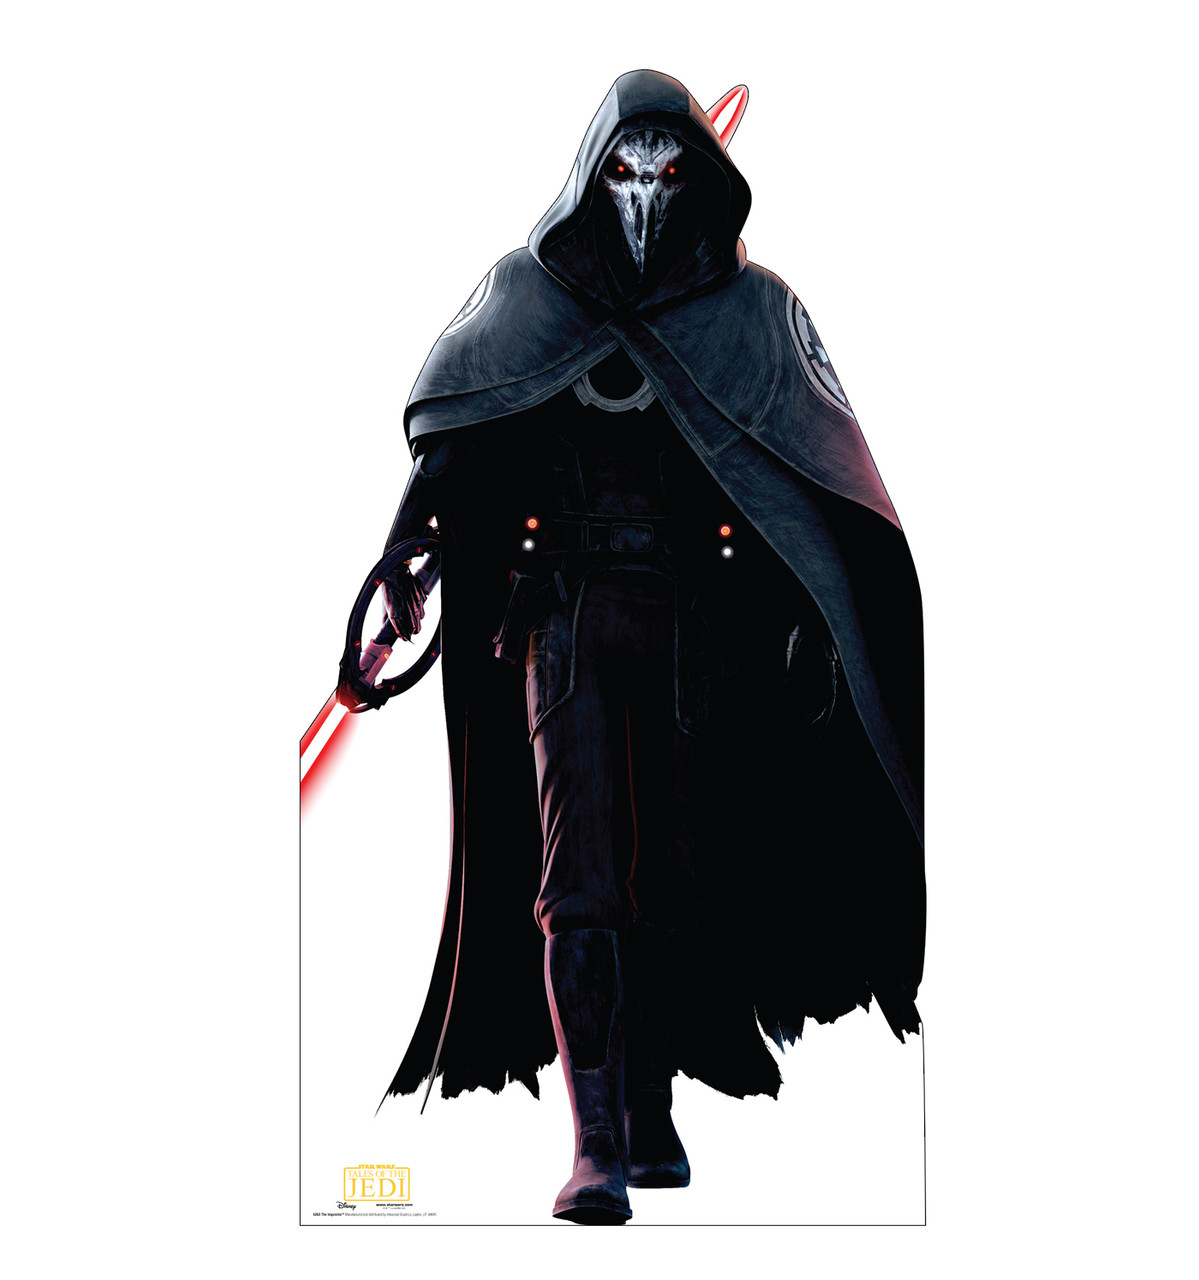 Life-size cardboard standee of The Inquisitor.